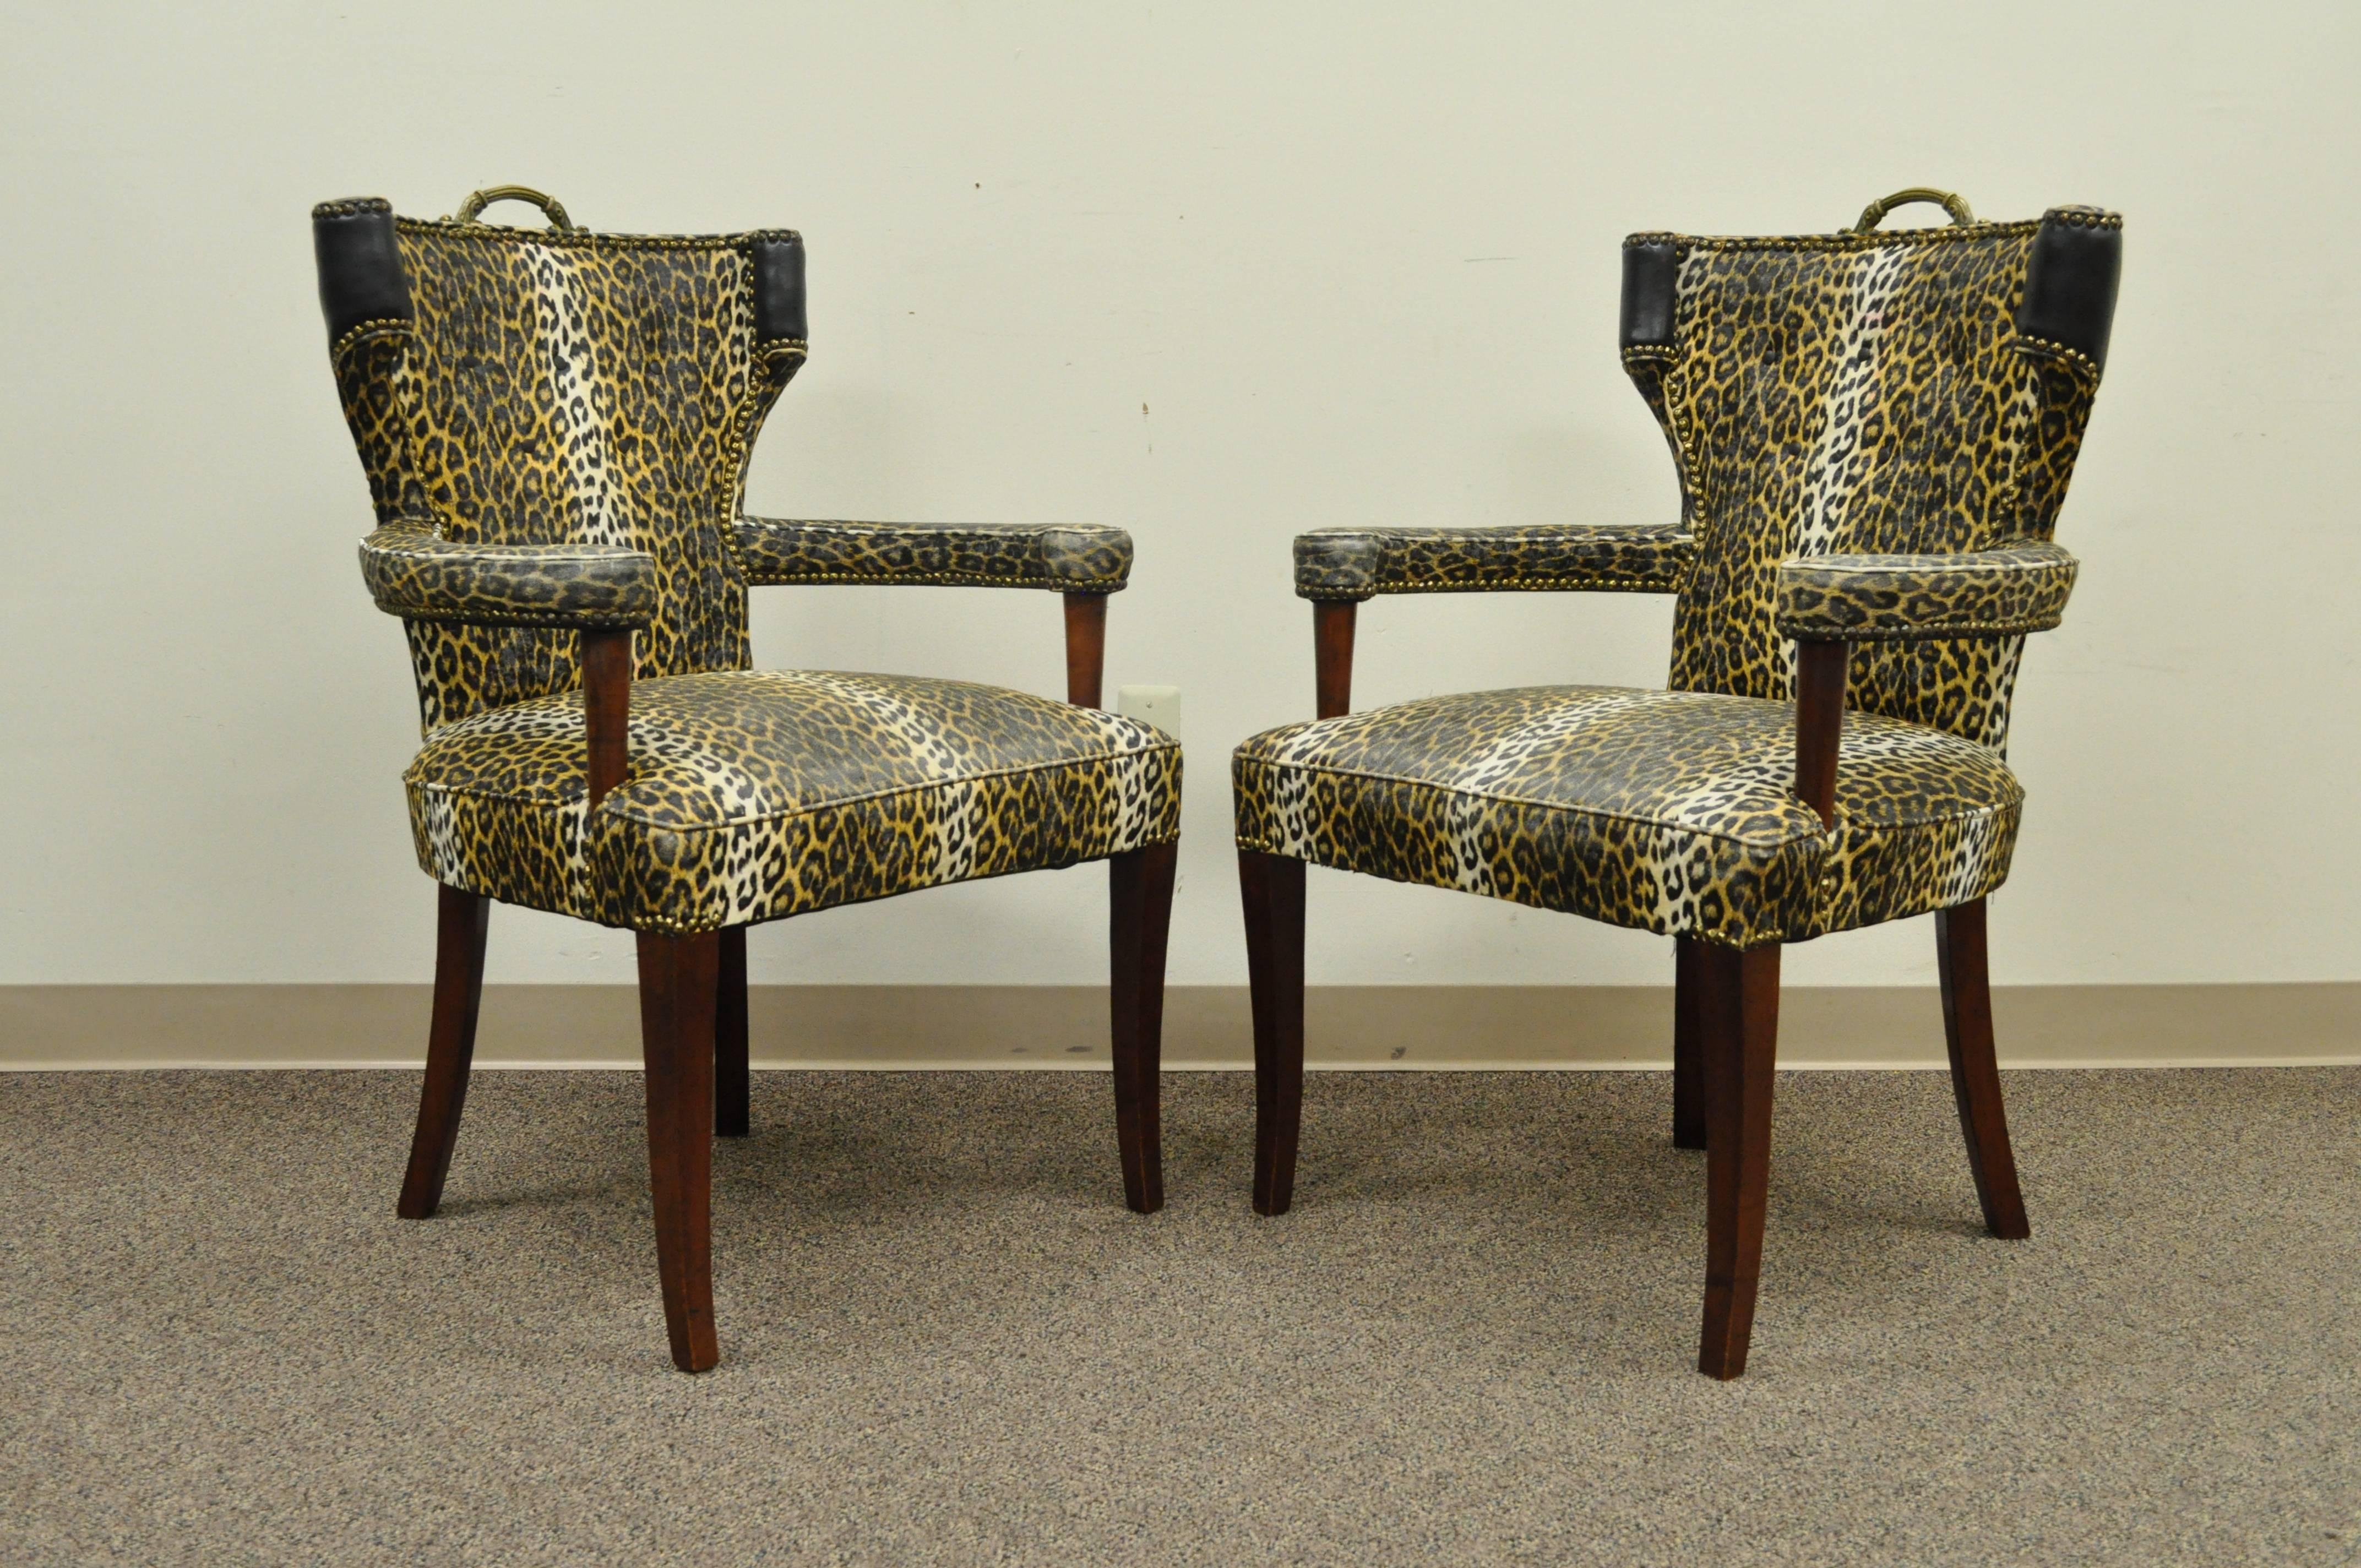 Pair of 1950s Hollywood Regency cheetah or leopard printed vinyl curved back armchairs attributed to Dorothy Draper. Item features mahogany wood frames, brass handles, curved backs, nailhead trim, and great form.